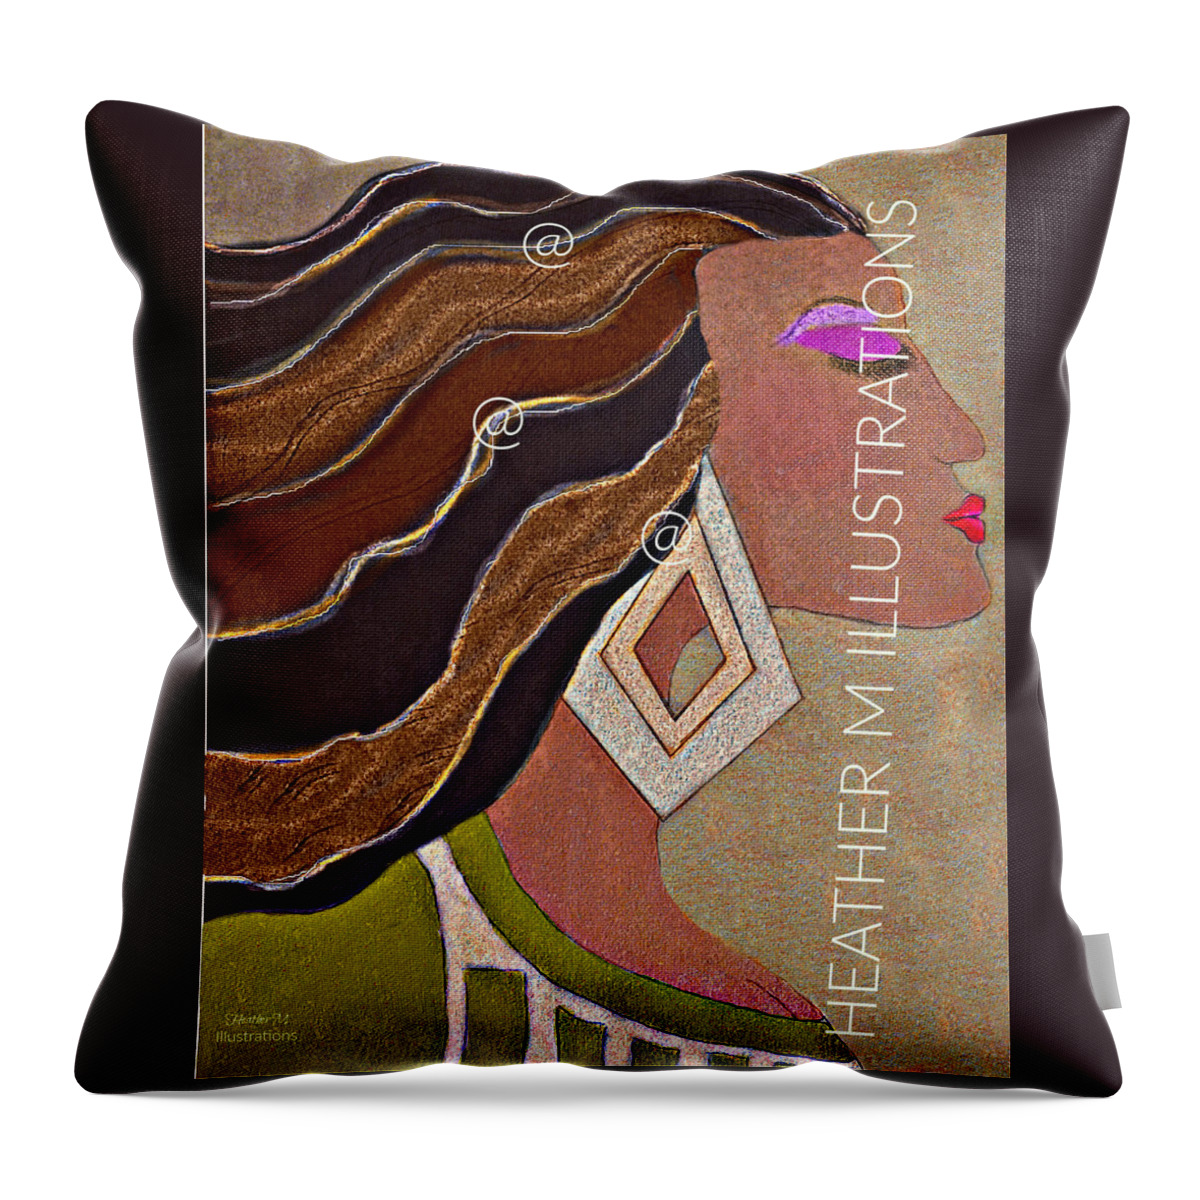 Dream Throw Pillow featuring the mixed media Dream by Heather M Illustrations and Photography